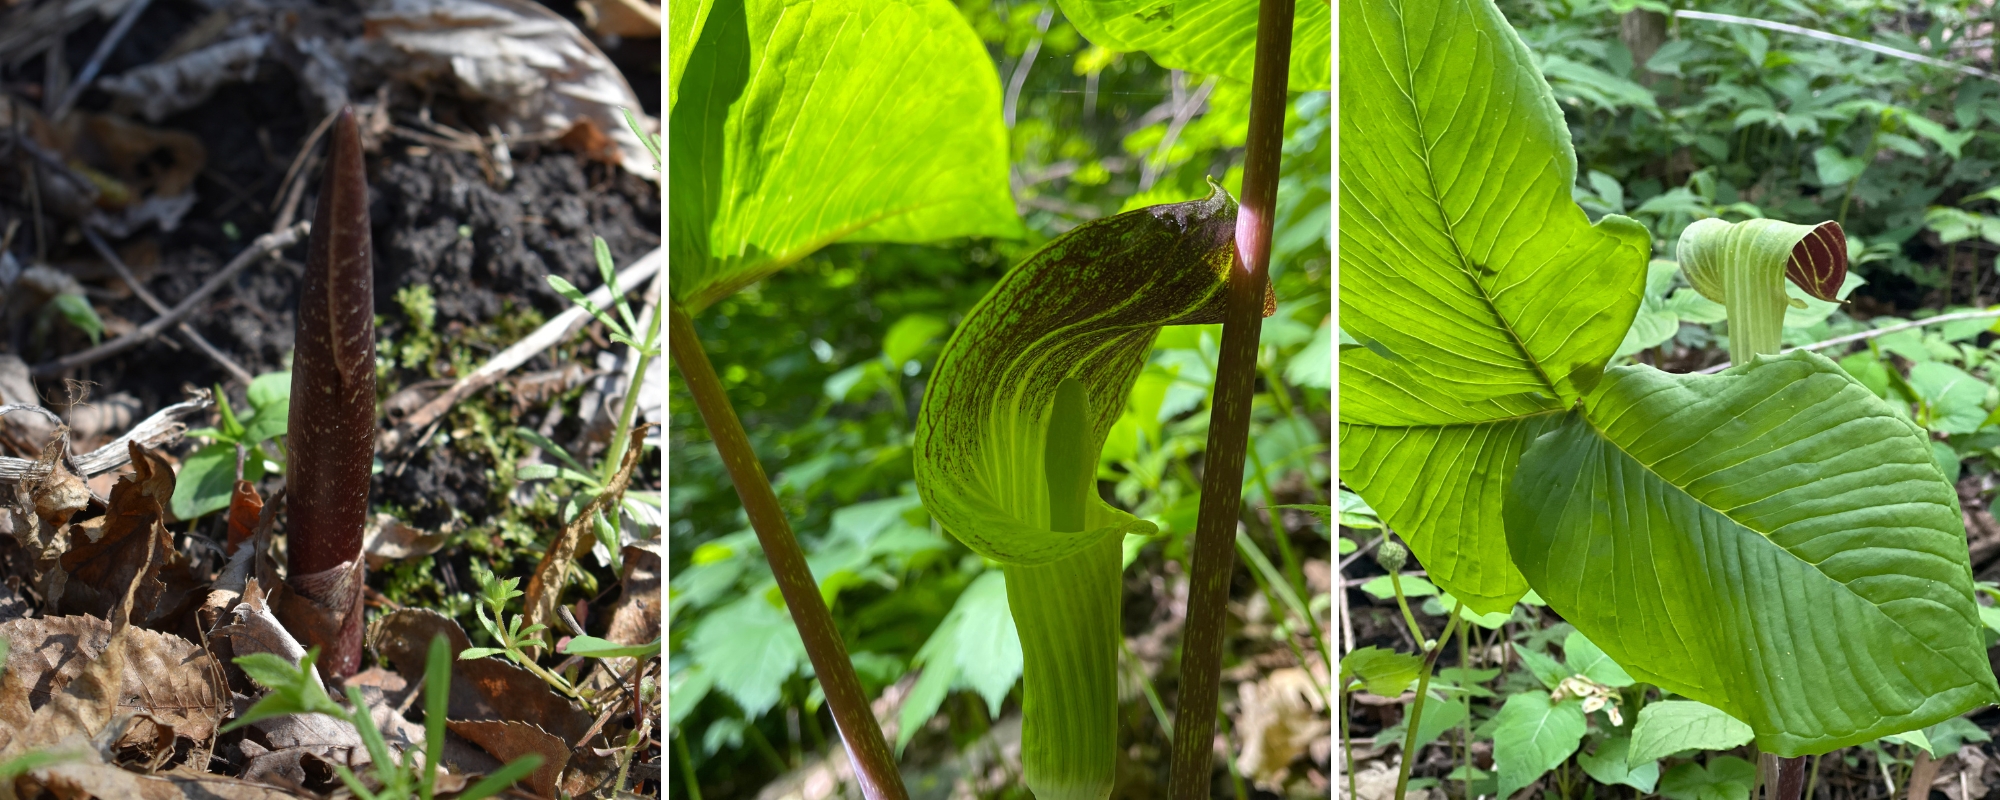 Three photos of Jack-in-the-pulpit